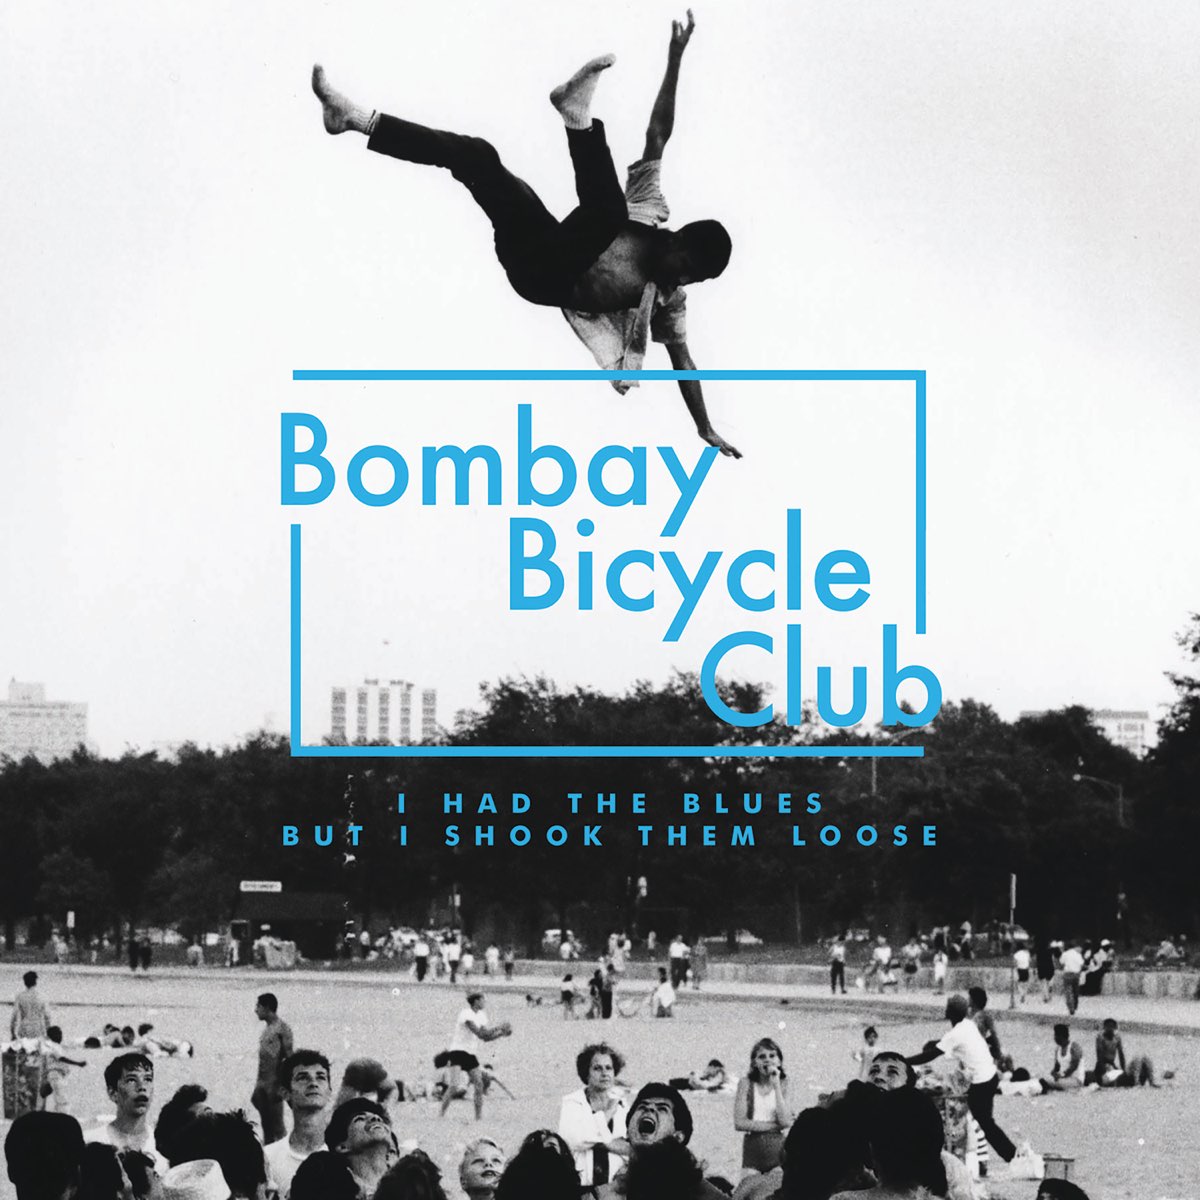 I album. Bombay Bicycle Club i had the Blues but i Shook them Loose. Bombay by Bicycle Club. Bicycle Club. Bombay Bicycle Club Cover.